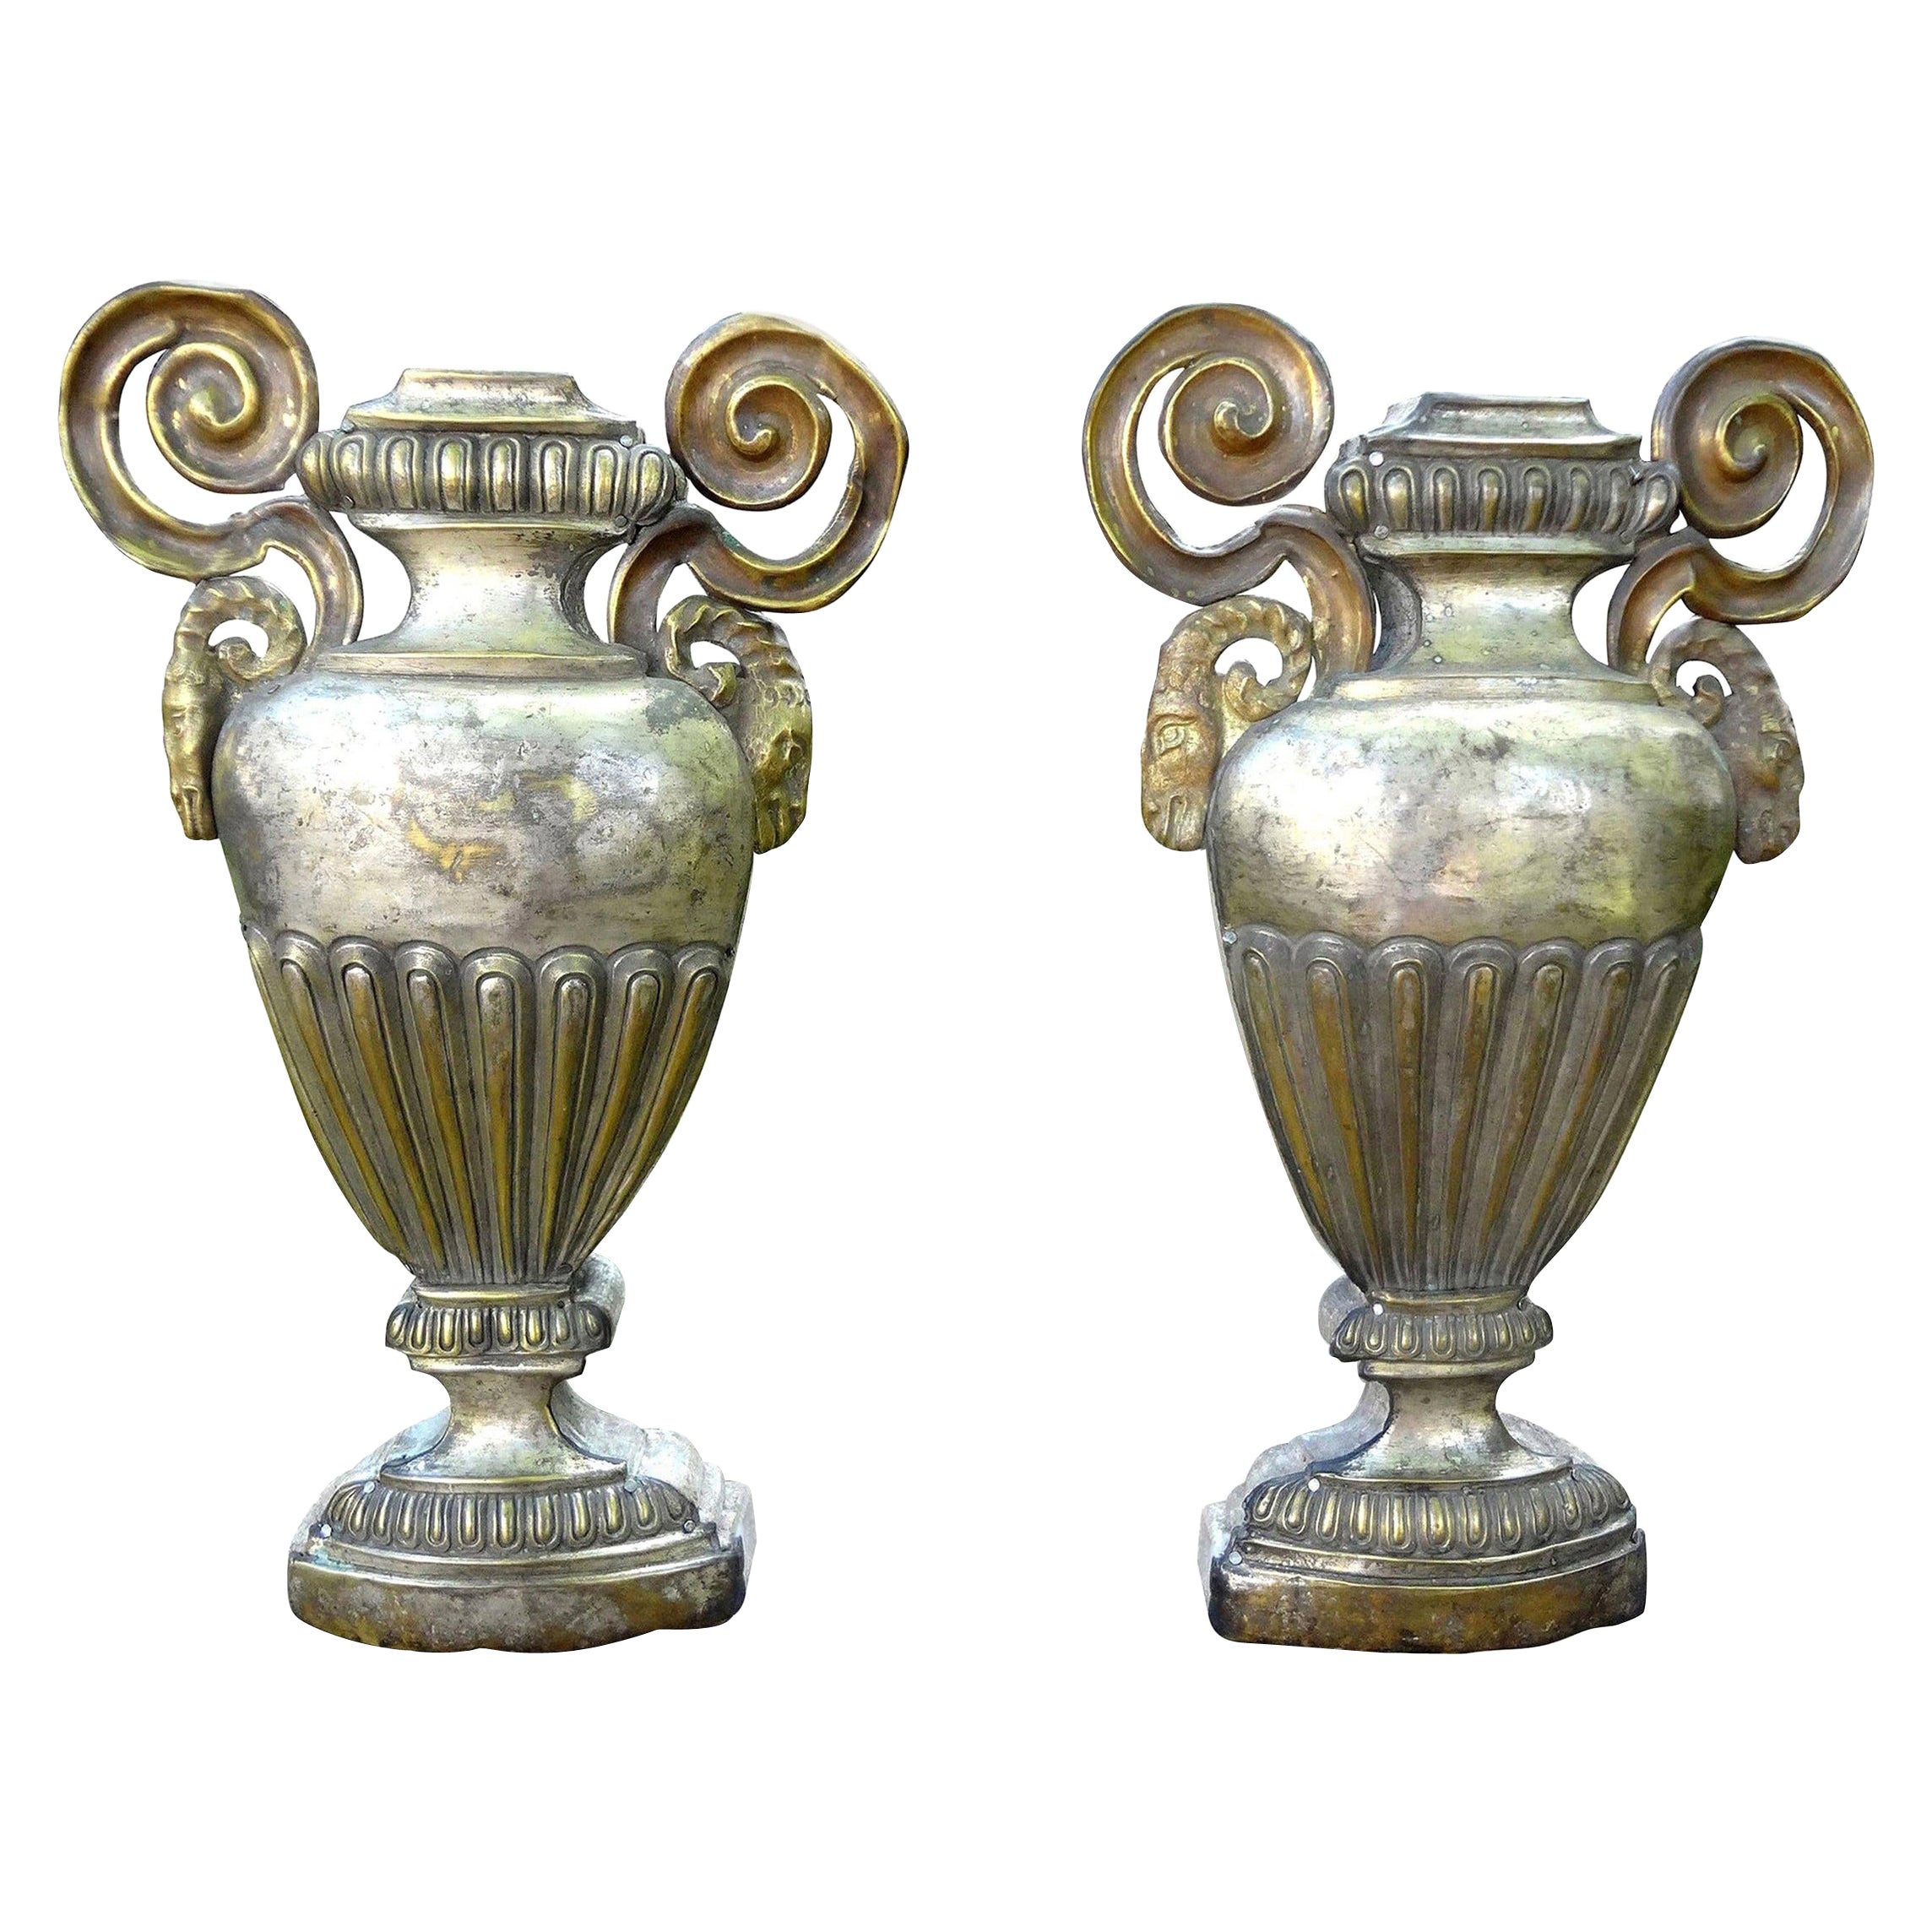 Pair of 18th Century Italian Neoclassical Style Silver Urns or Porta Palmas For Sale